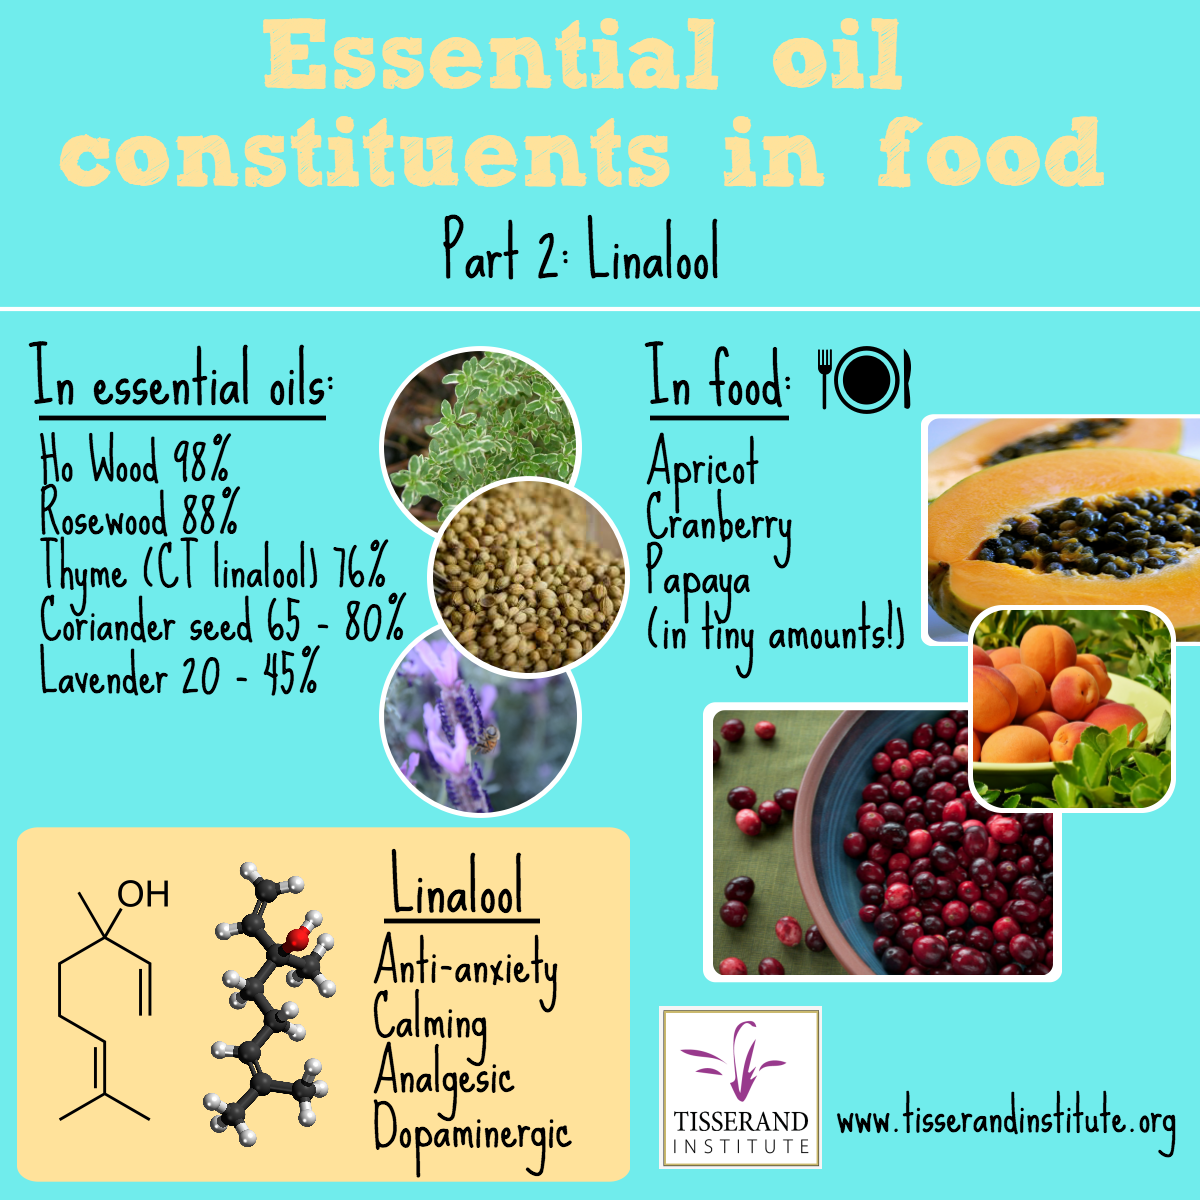 Essential Oil Constituents in Food Part 2: Linalool